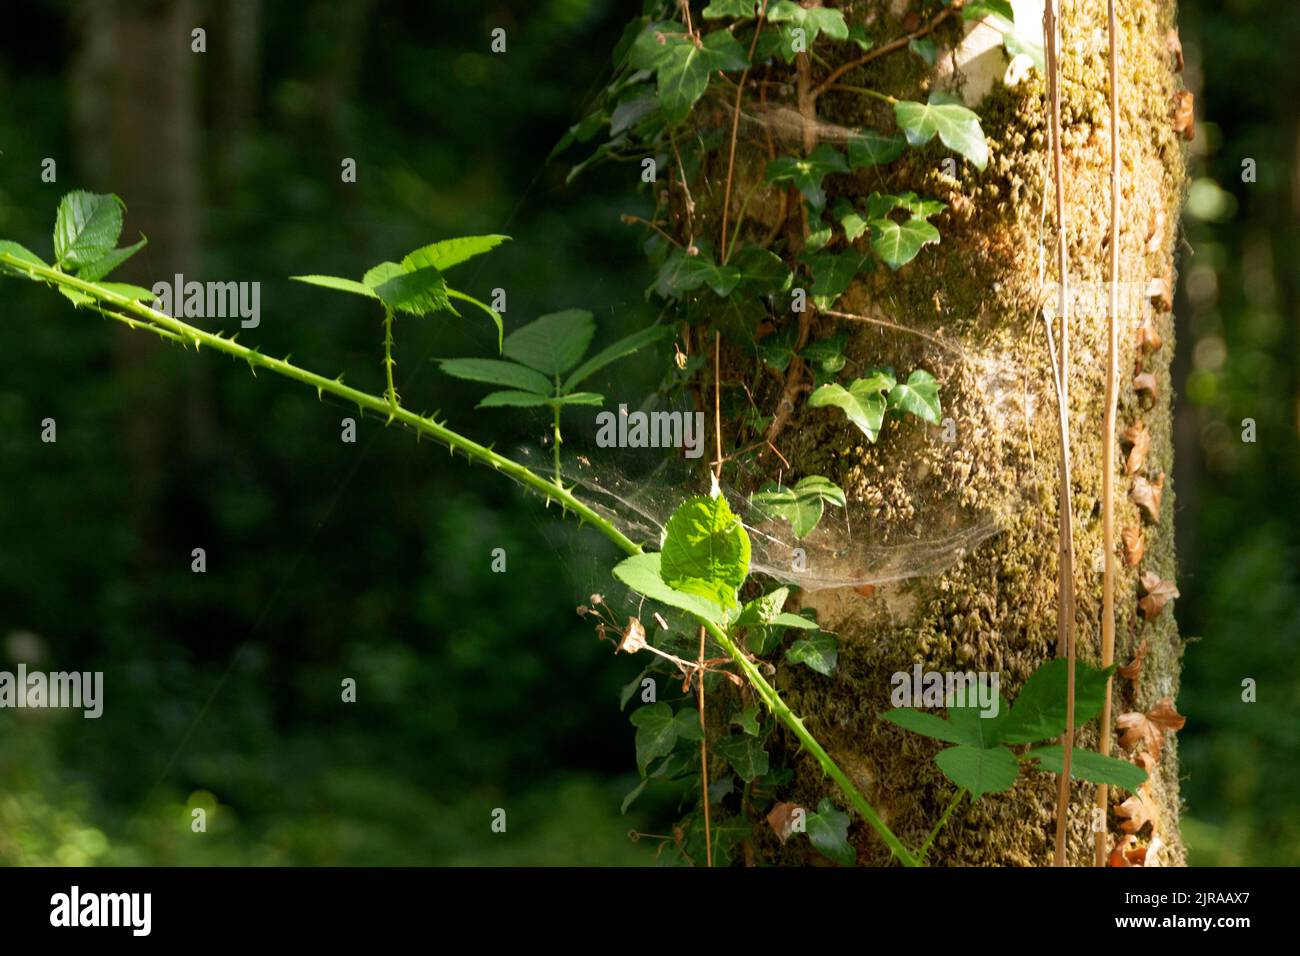 A close up view of a spiders web arttached to the trees. Stock Photo